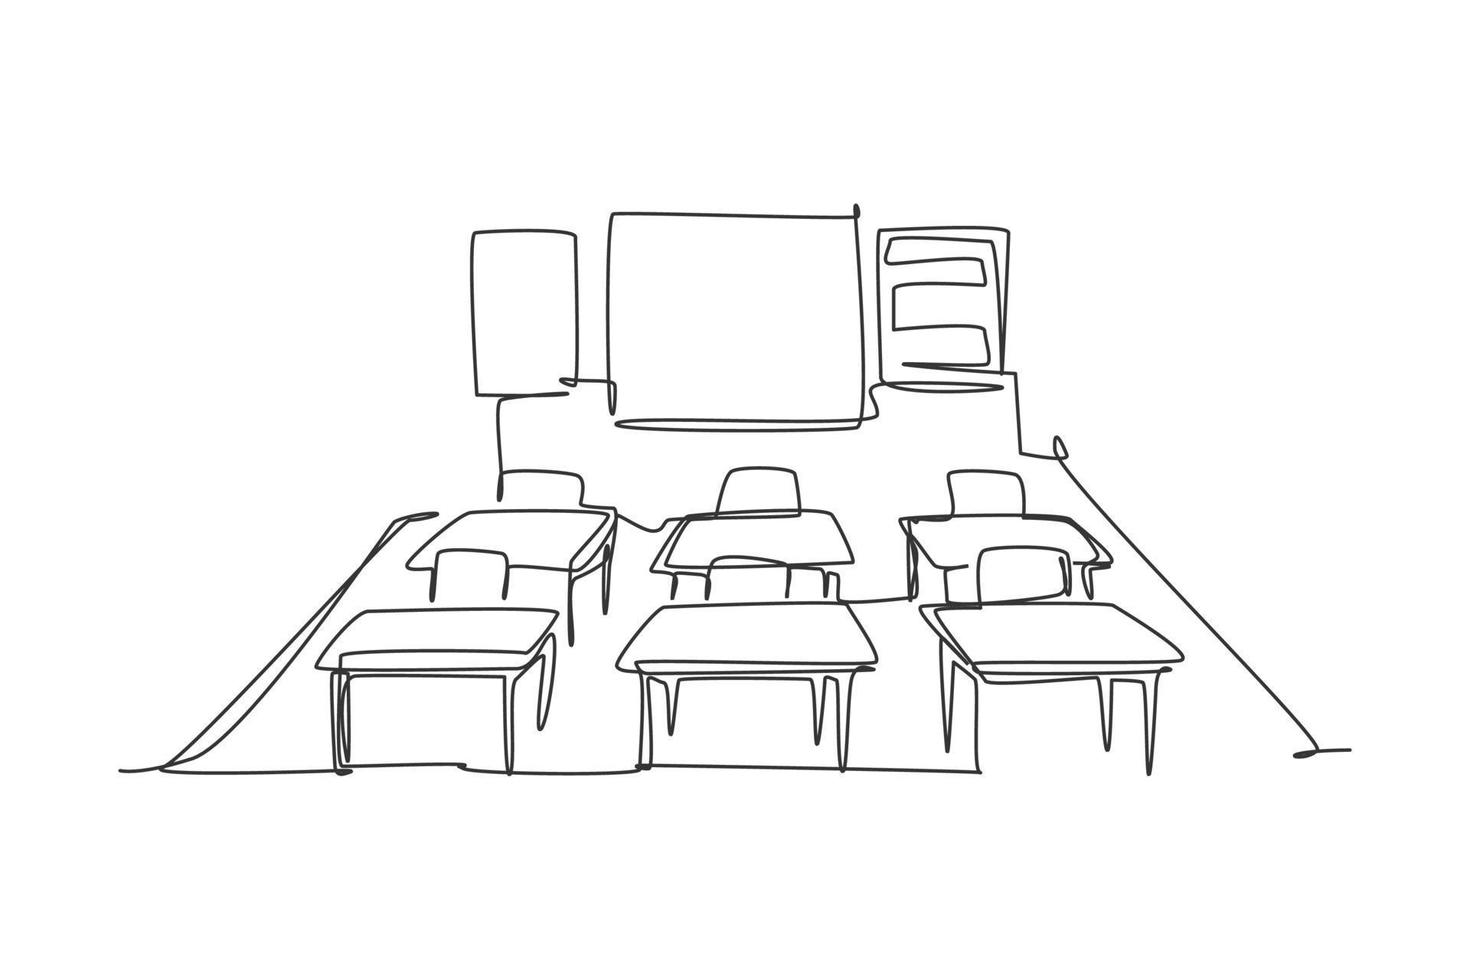 Continuous one line drawing of kindergarten school classroom interior. Back to school hand drawn minimalism concept. Single line draw design for education vector graphic illustration